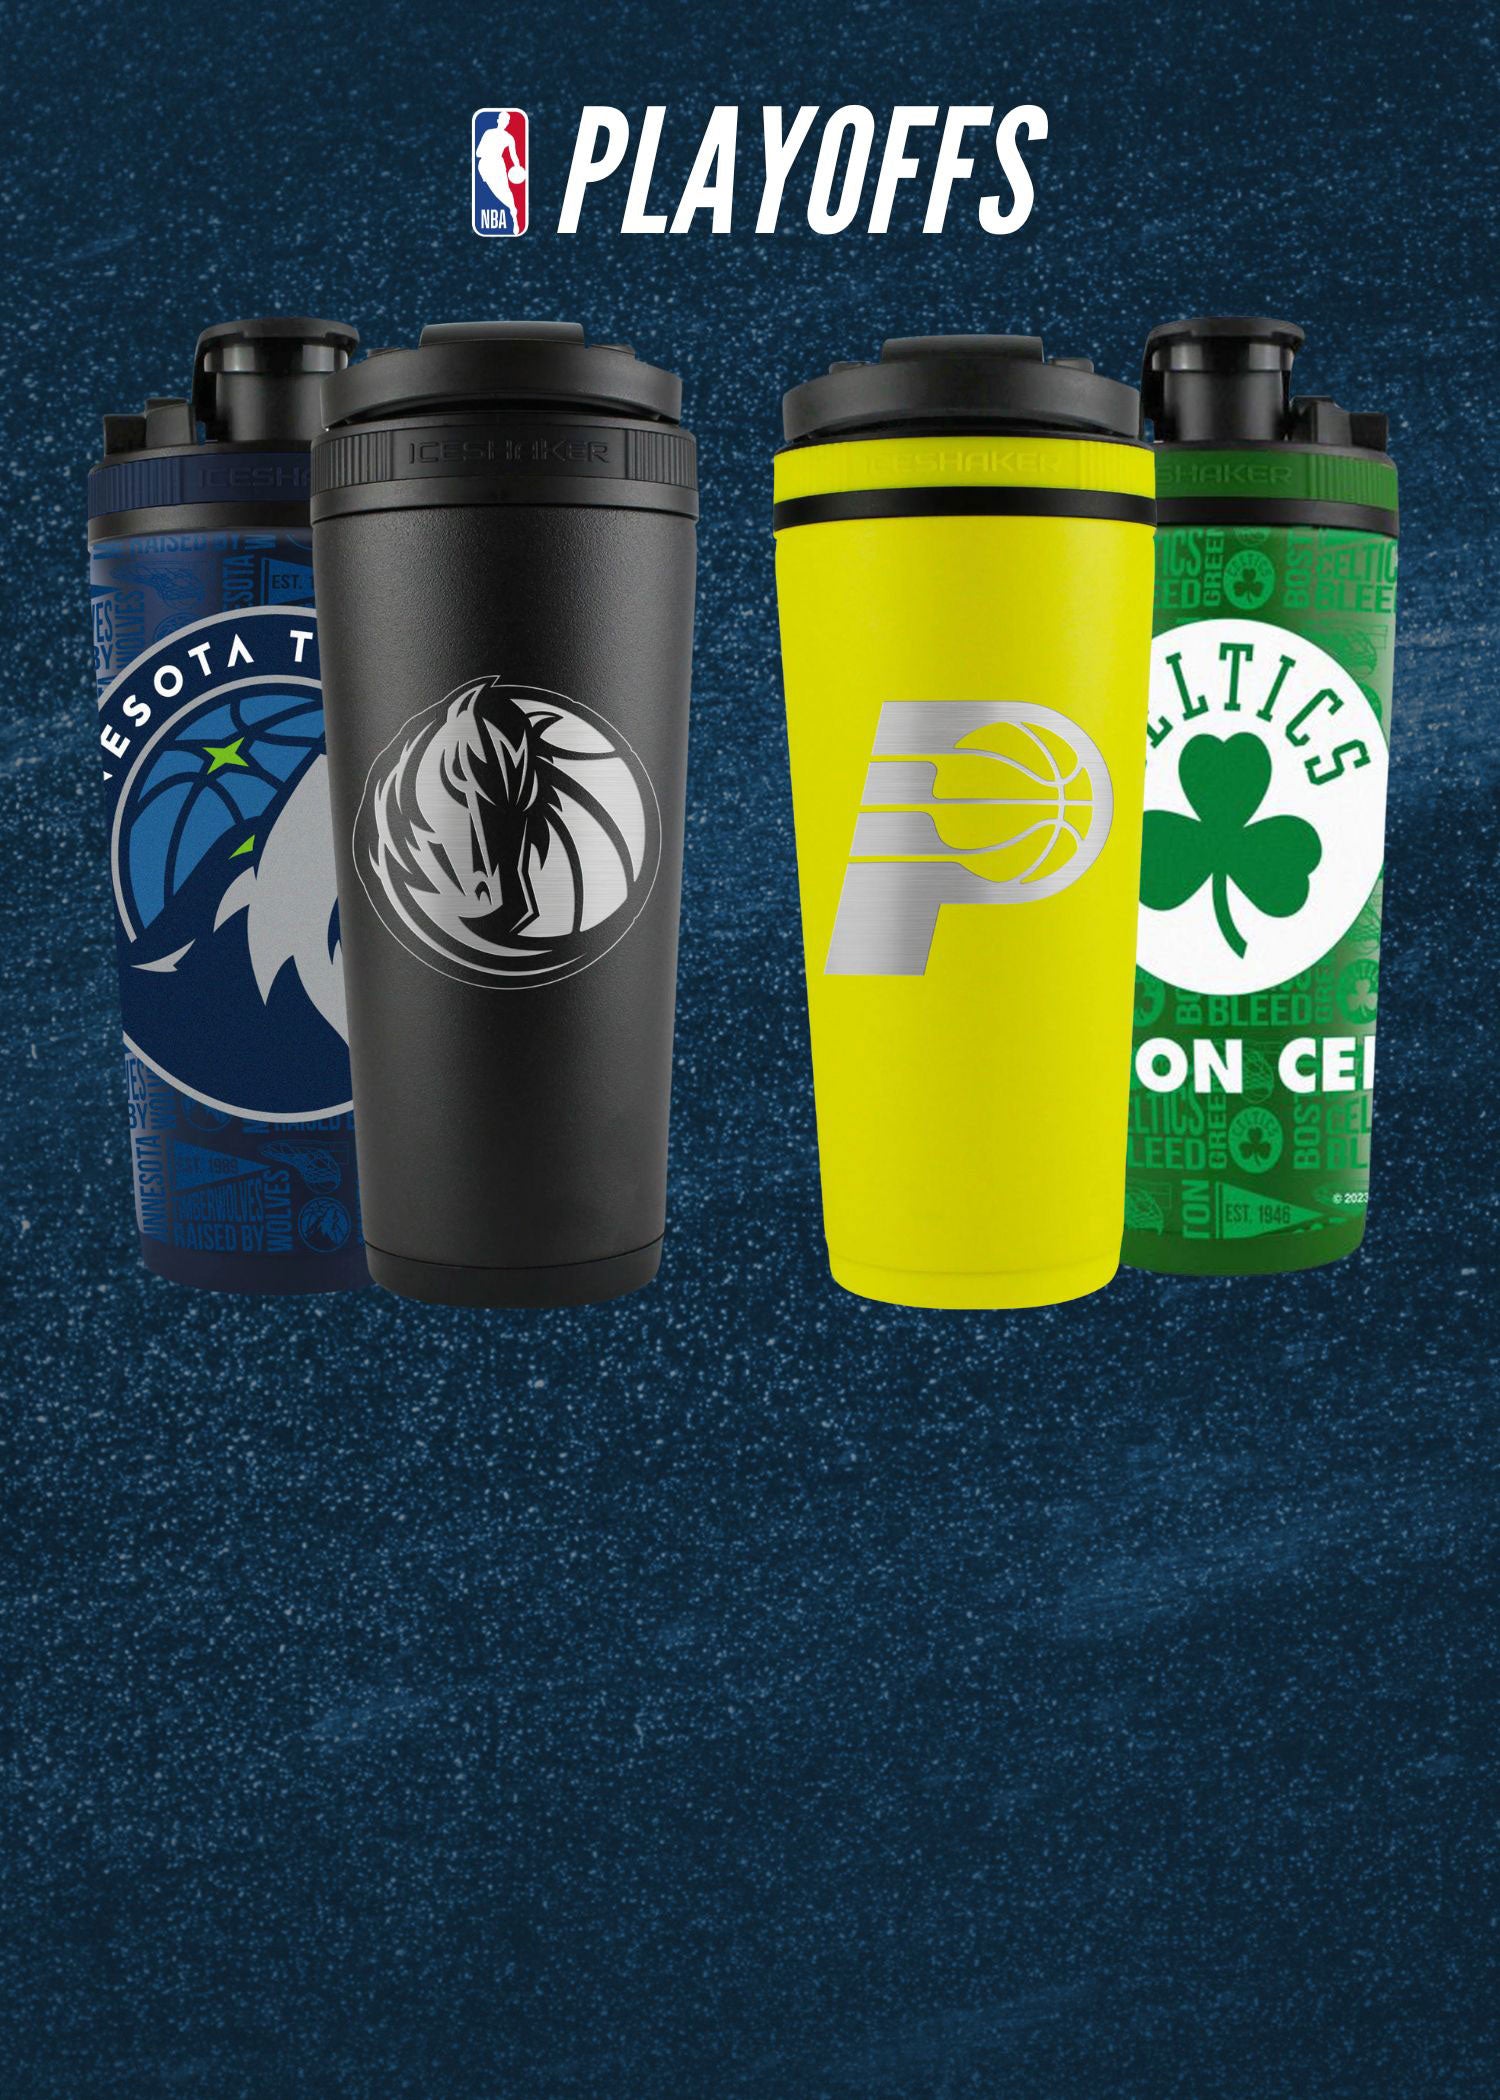 Rep your team with Officially Licensed NBA Ice Shakers. Shop Minnesota Timberwolves, Dallas Mavericks, Indiana Pacers, and Boston Celtics Ice Shaker Now.